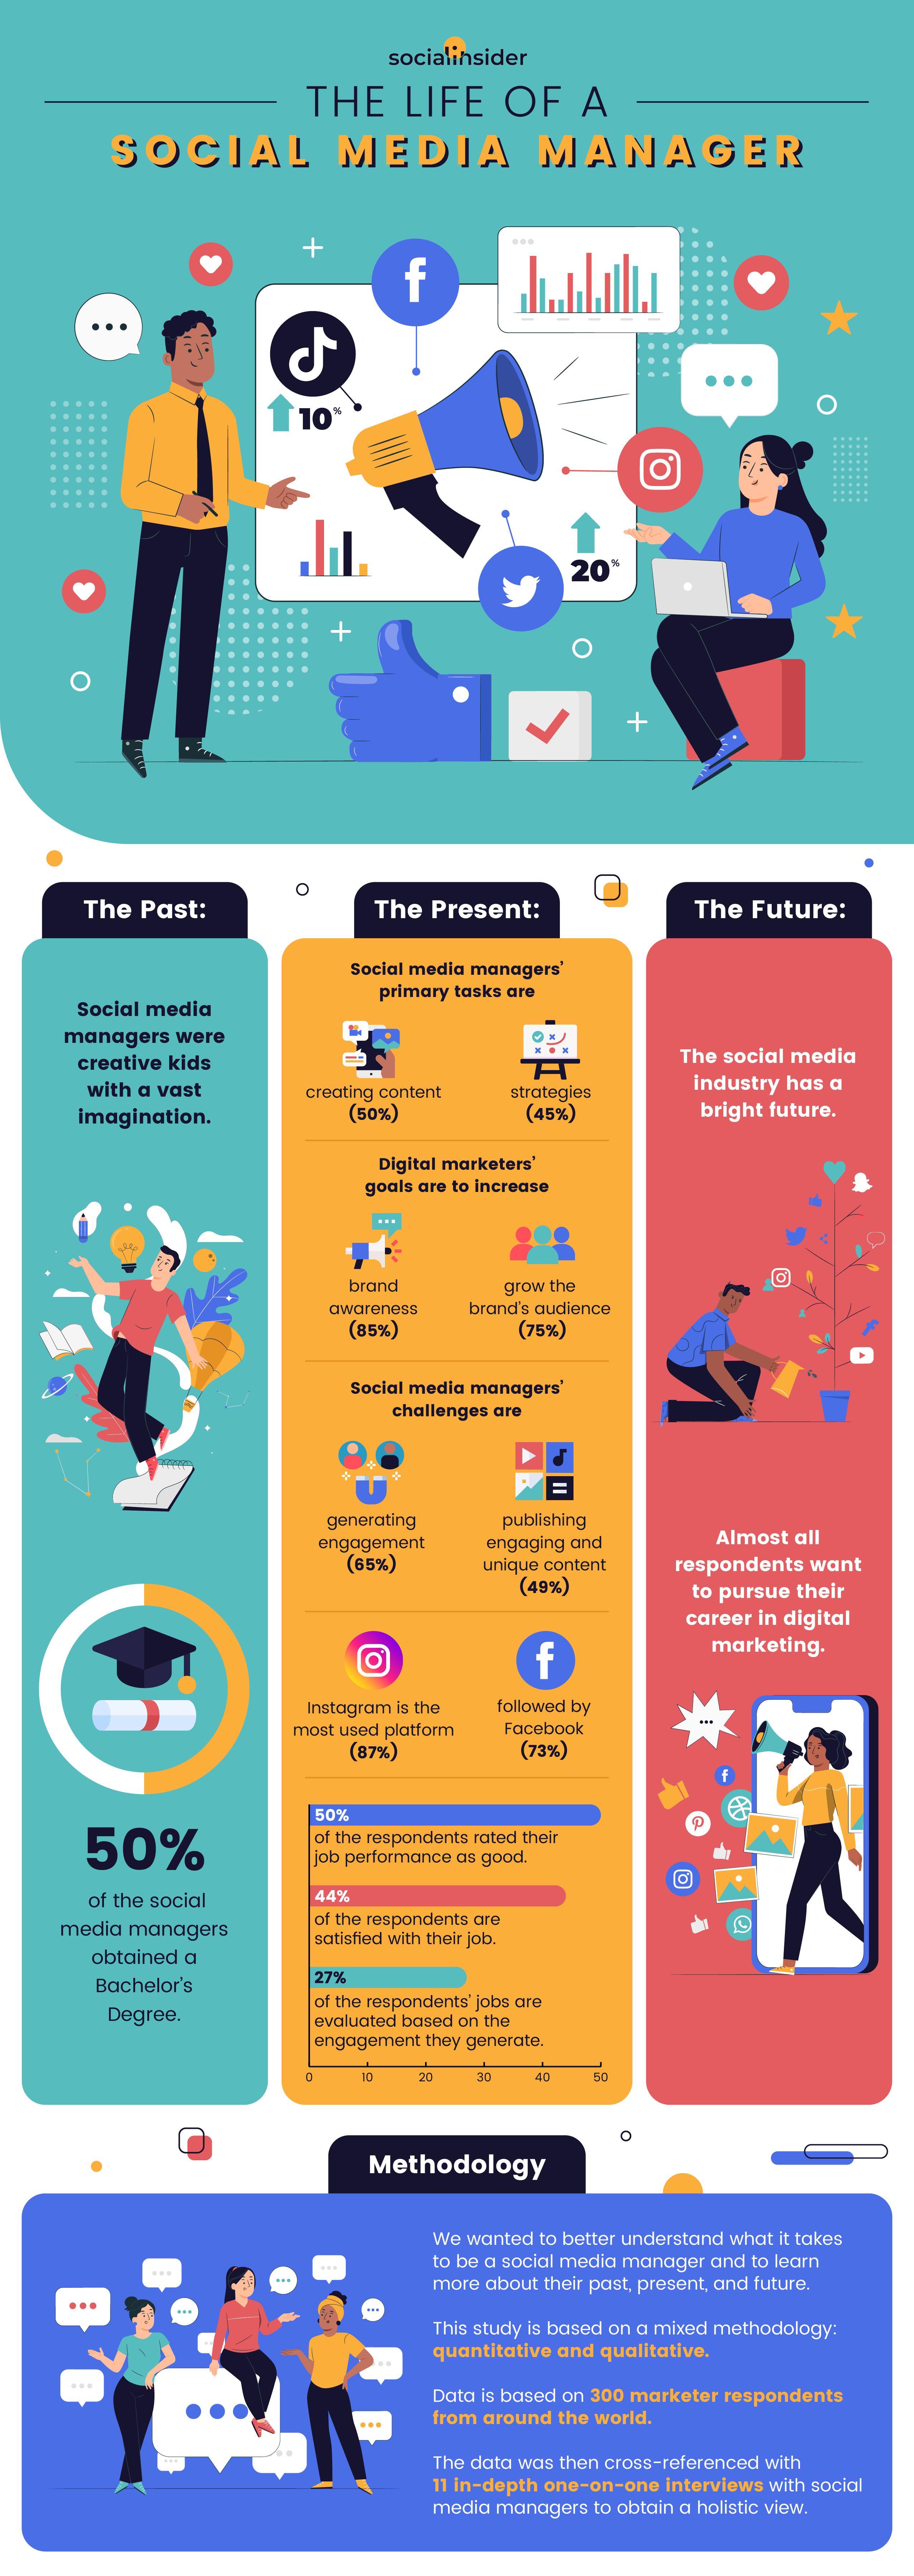 This is an infographic showing details about the social media manager role.